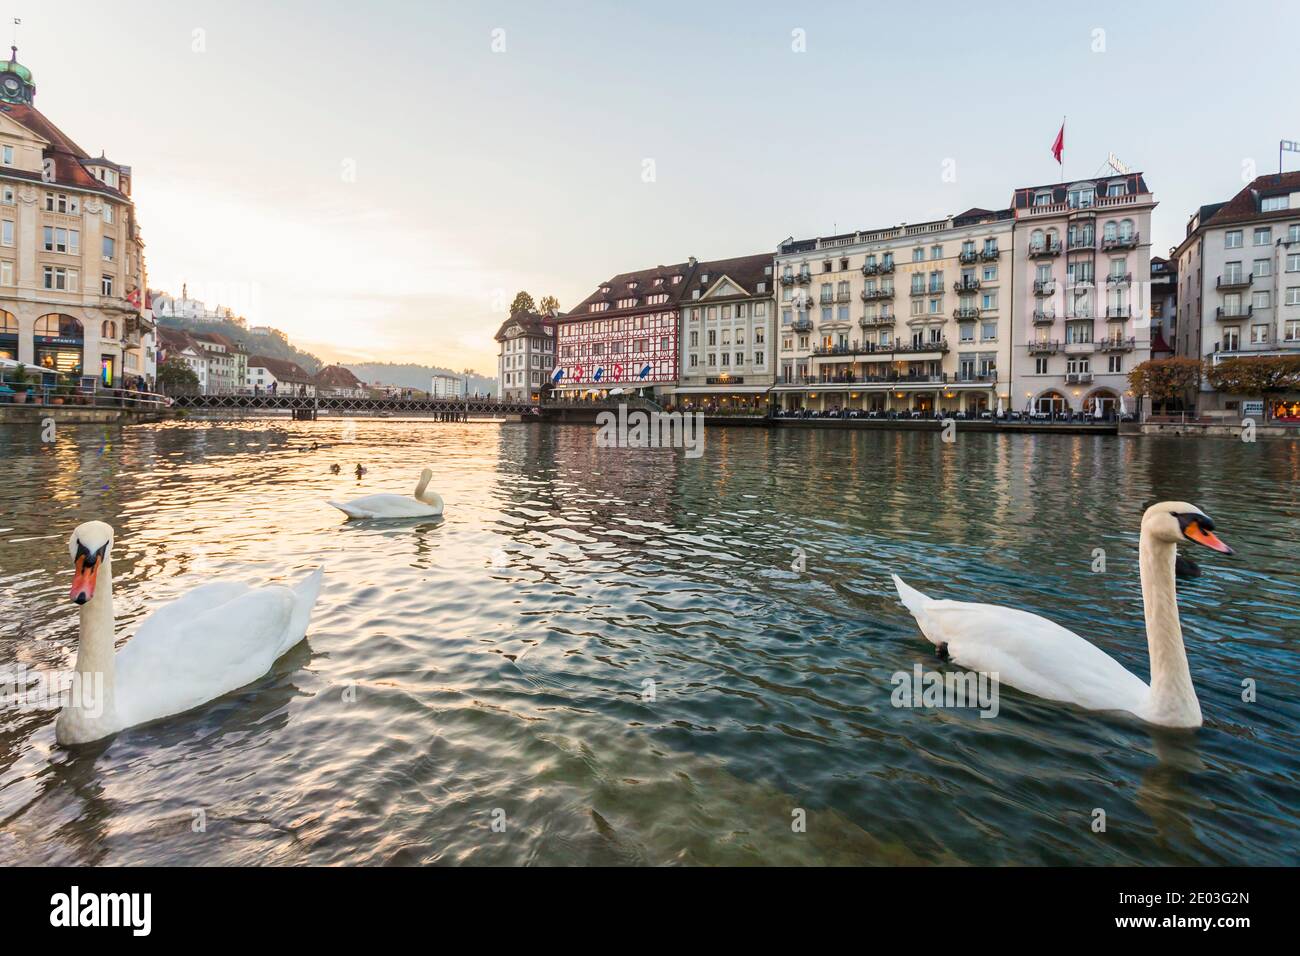 Swans in front of the old town of Lucerne, Switzerland Stock Photo